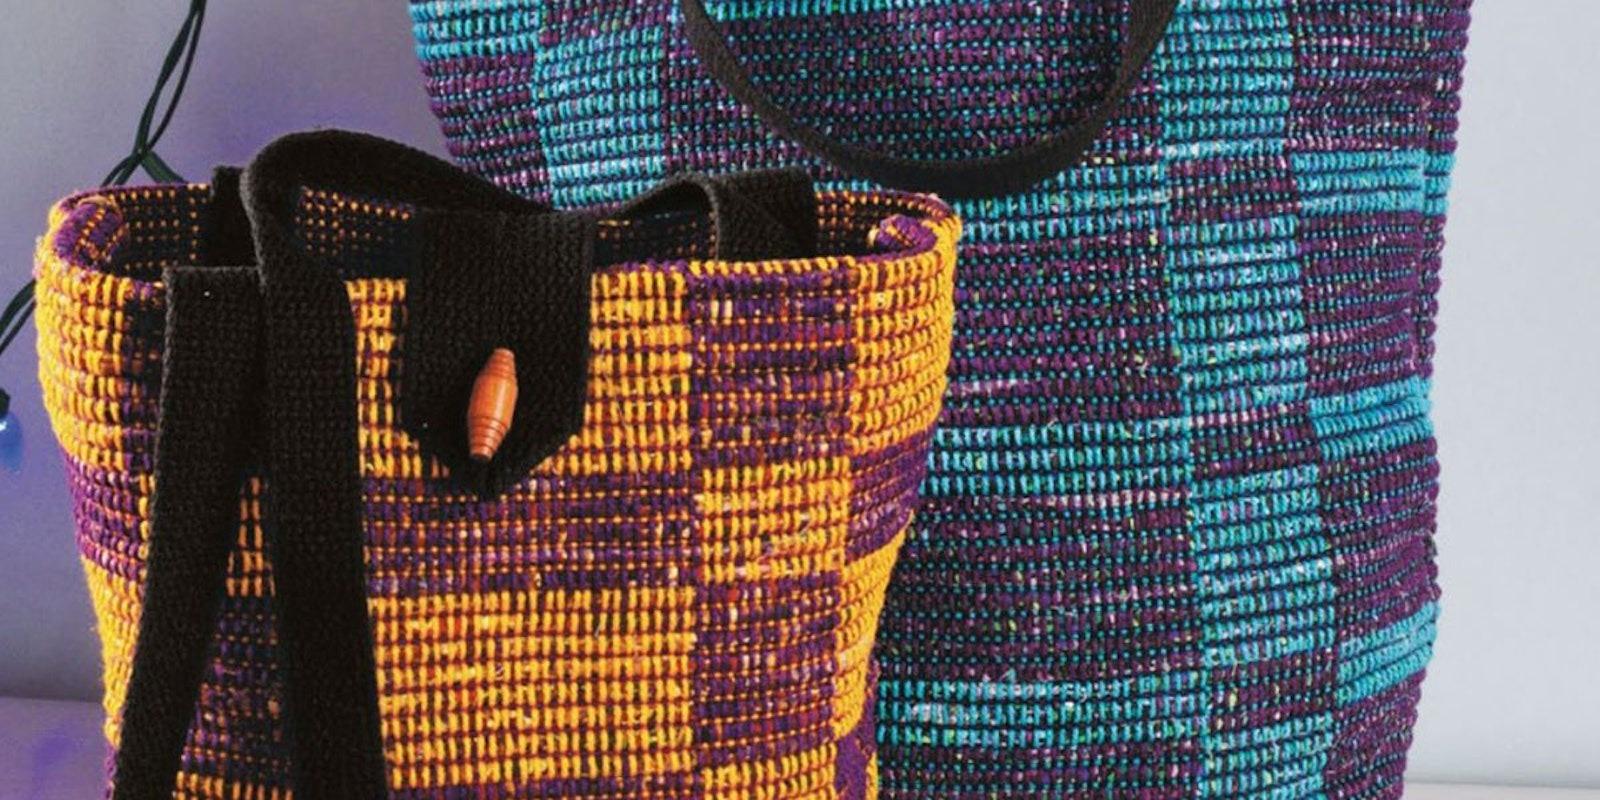 Handwoven Bags: A Dying Art We Need to Preserve - Mochila